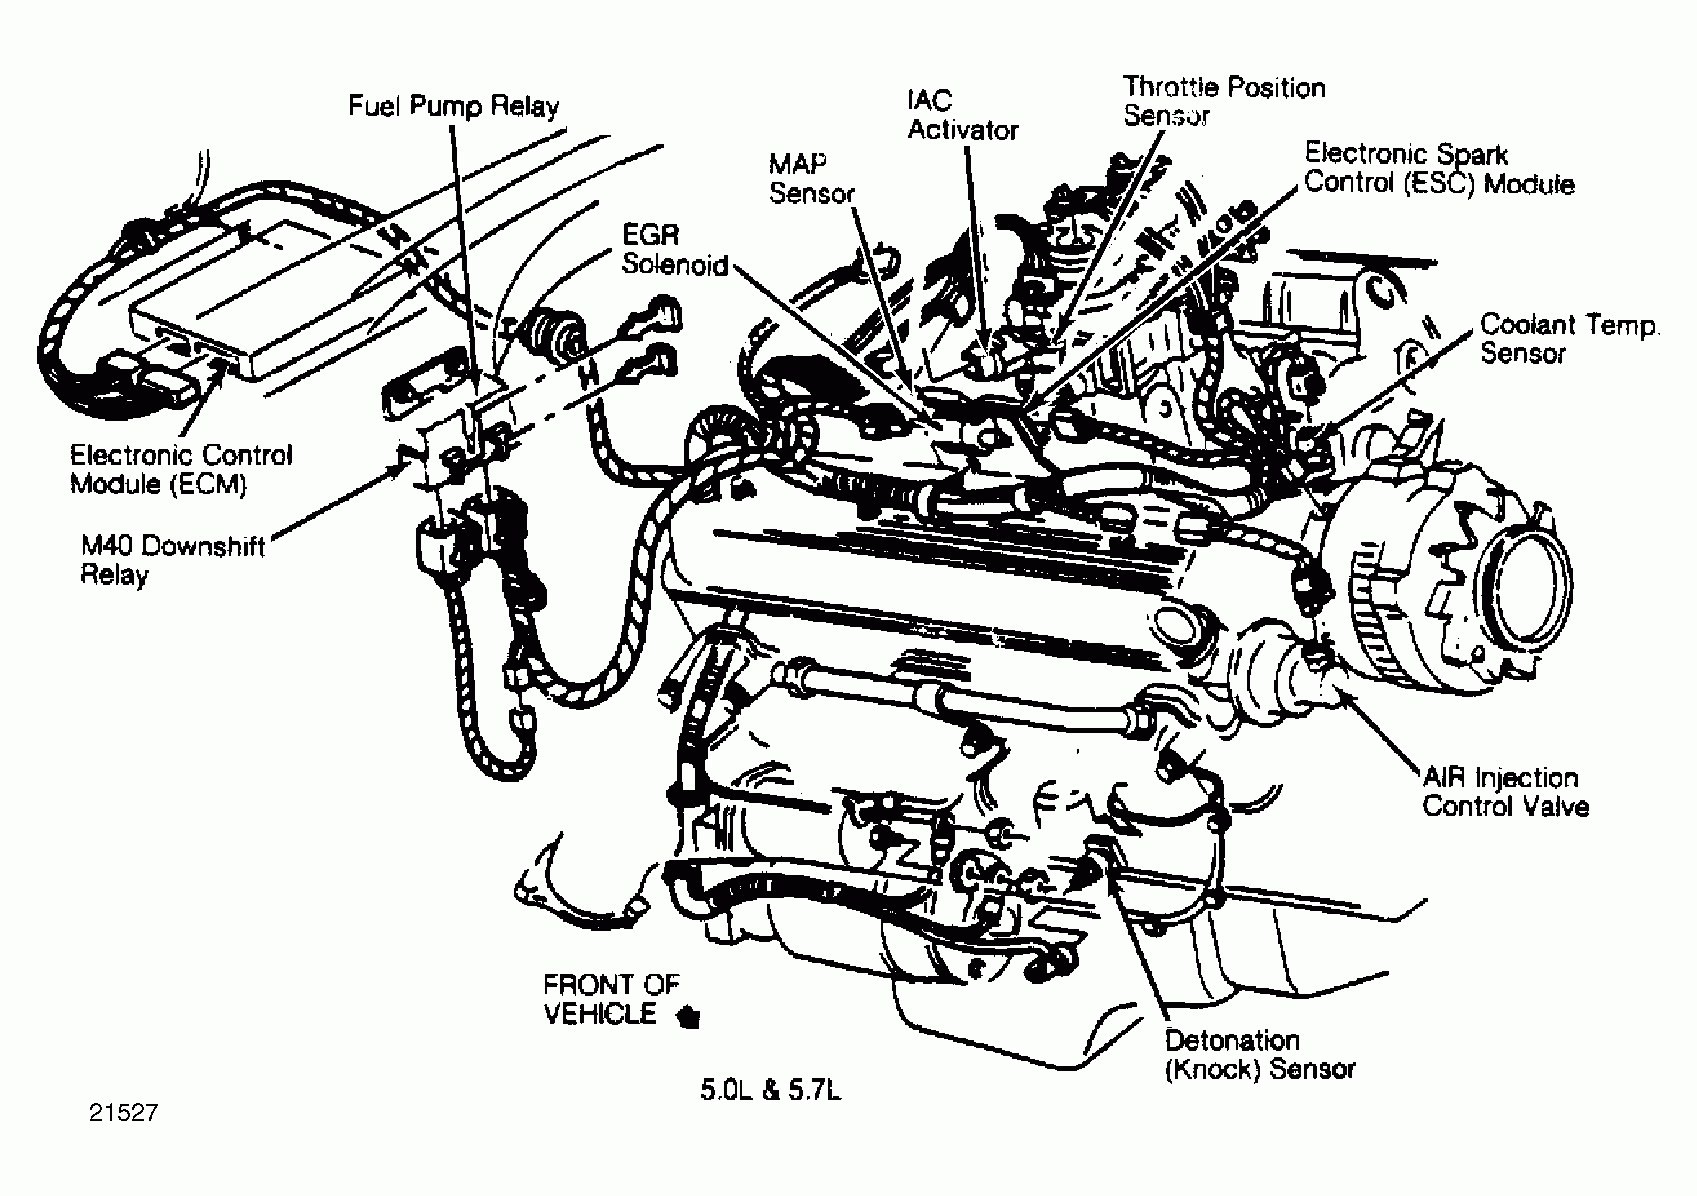 Car Engine Parts Names with Diagram 350 Chevy Engine Parts Diagram Wiring Diagrams Konsult Of Car Engine Parts Names with Diagram